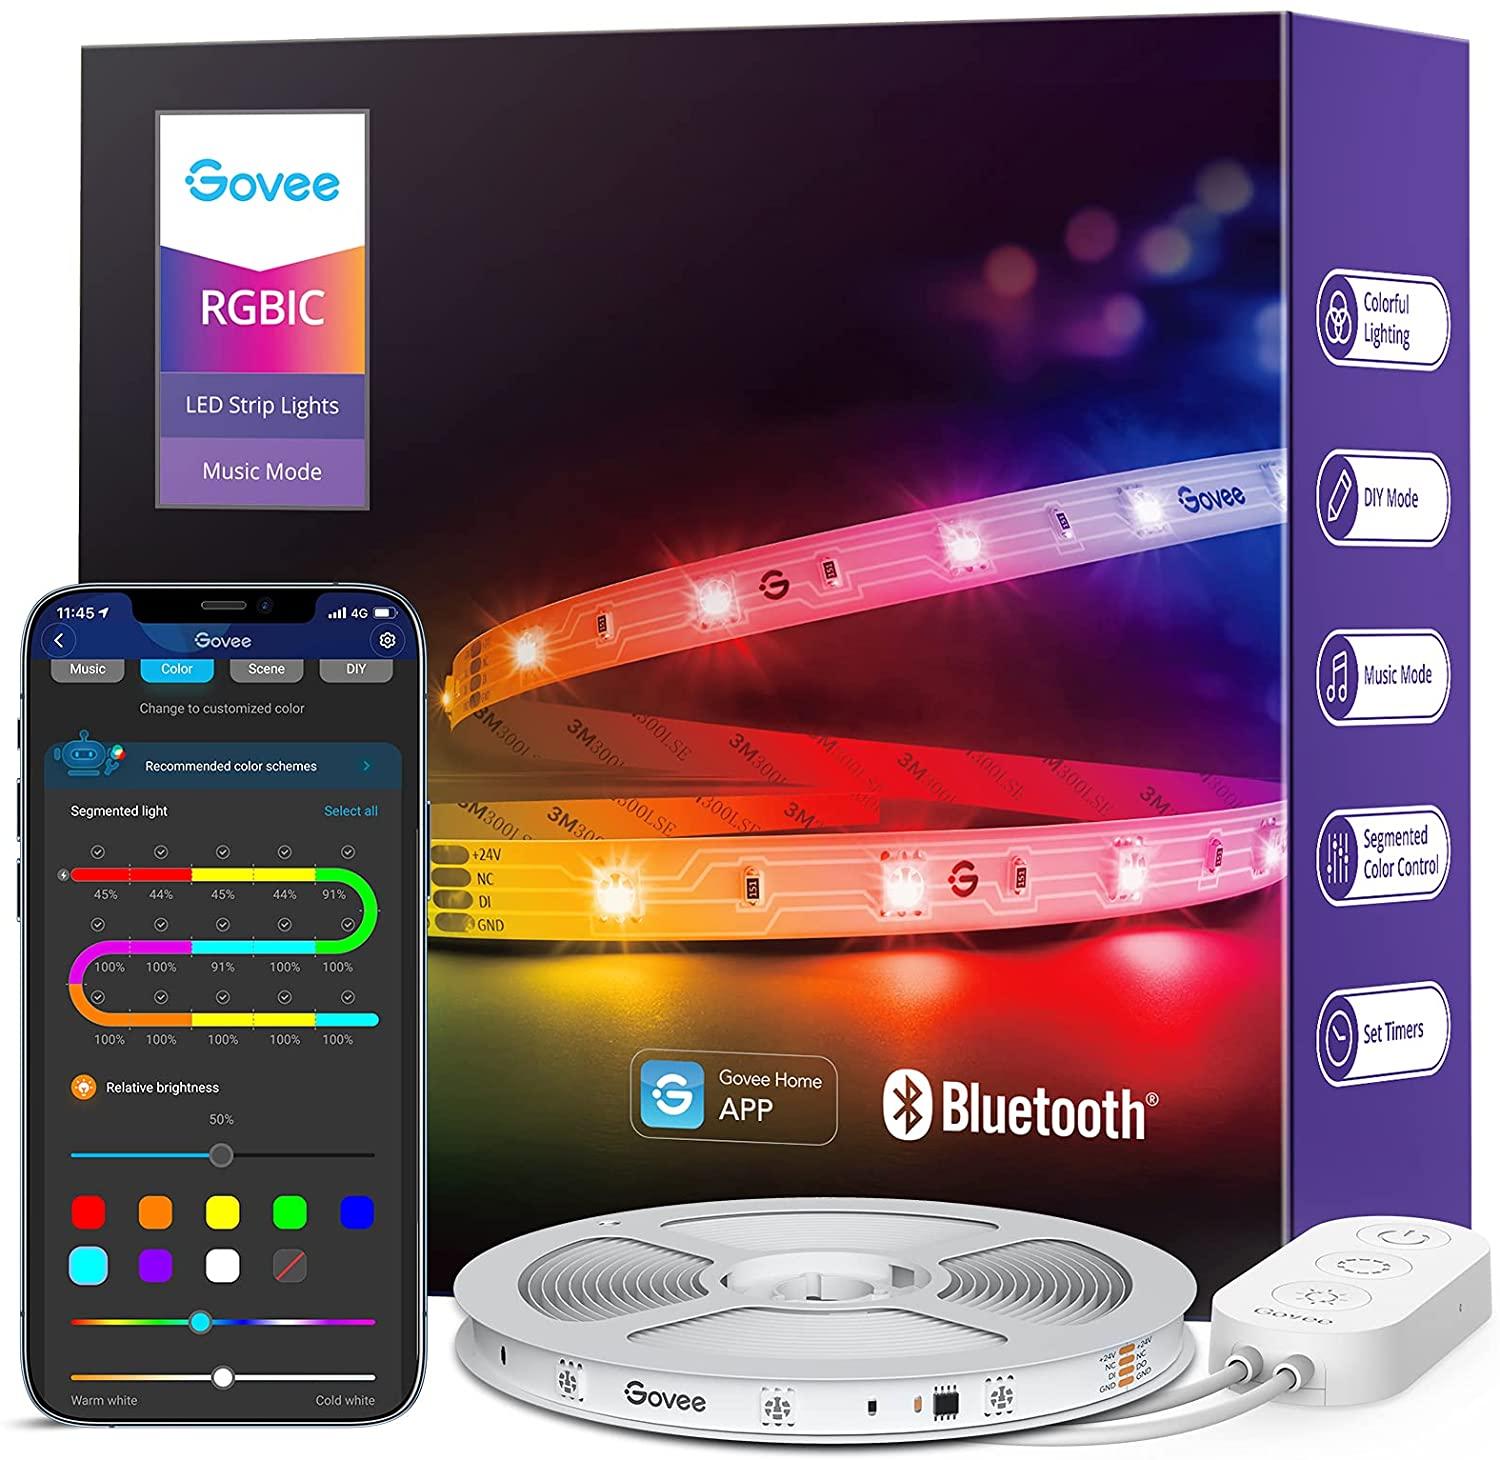  16ft Govee RGBIC Smart LED Strip Lights for $14 Shipped